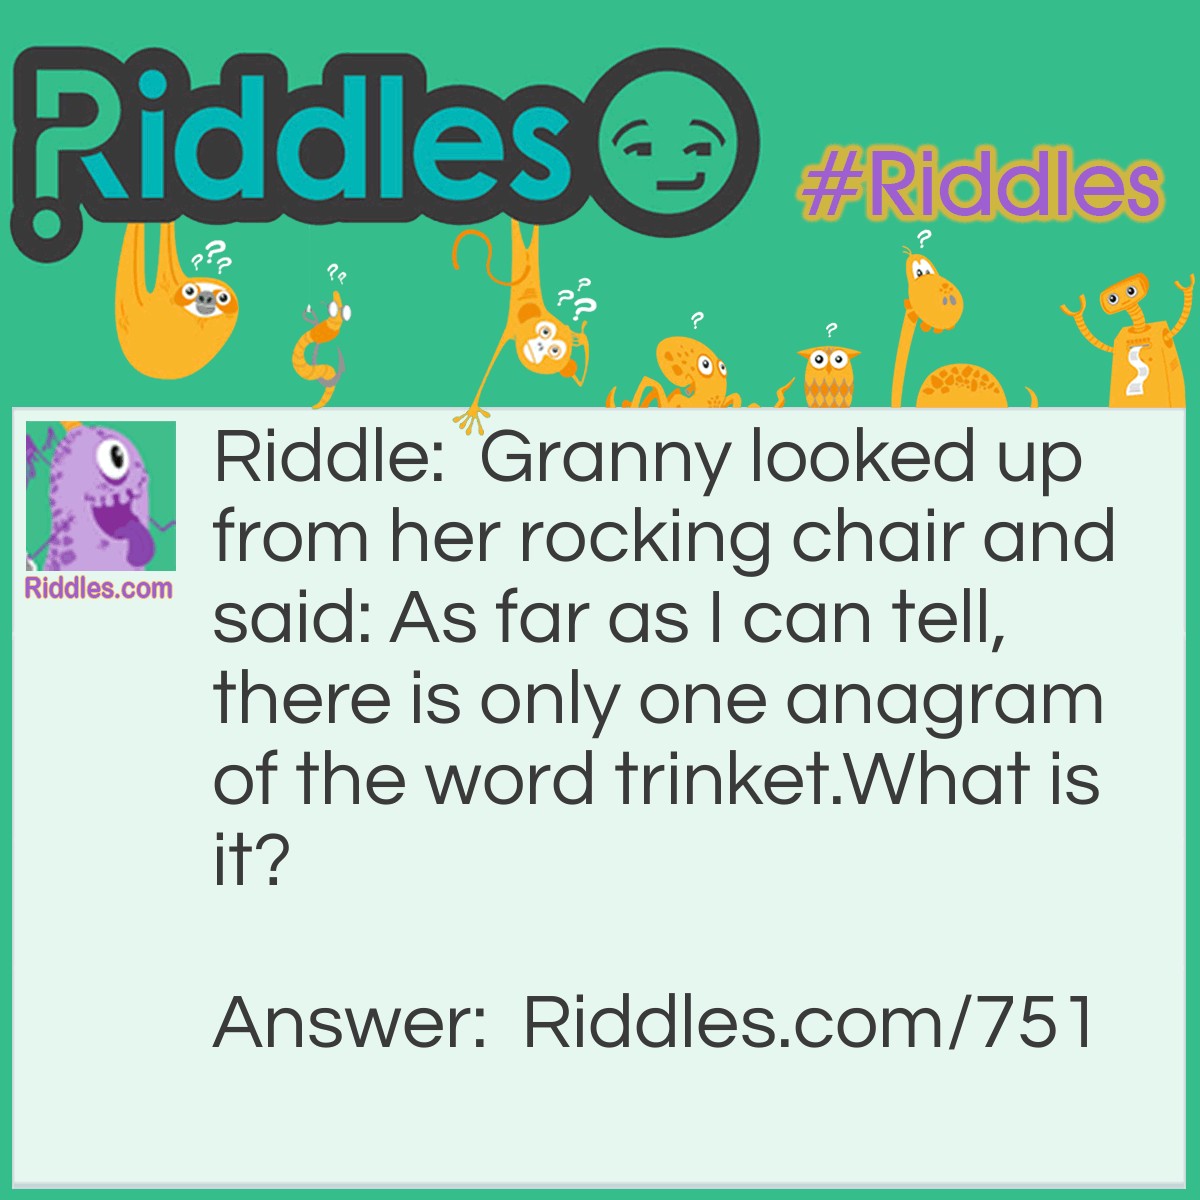 Riddle: Granny looked up from her rocking chair and said: As far as I can tell, there is only one <a href="https://www.riddles.com/quiz/21-anagrams">anagram</a> of the word trinket.
What is it? Answer: The word knitter.